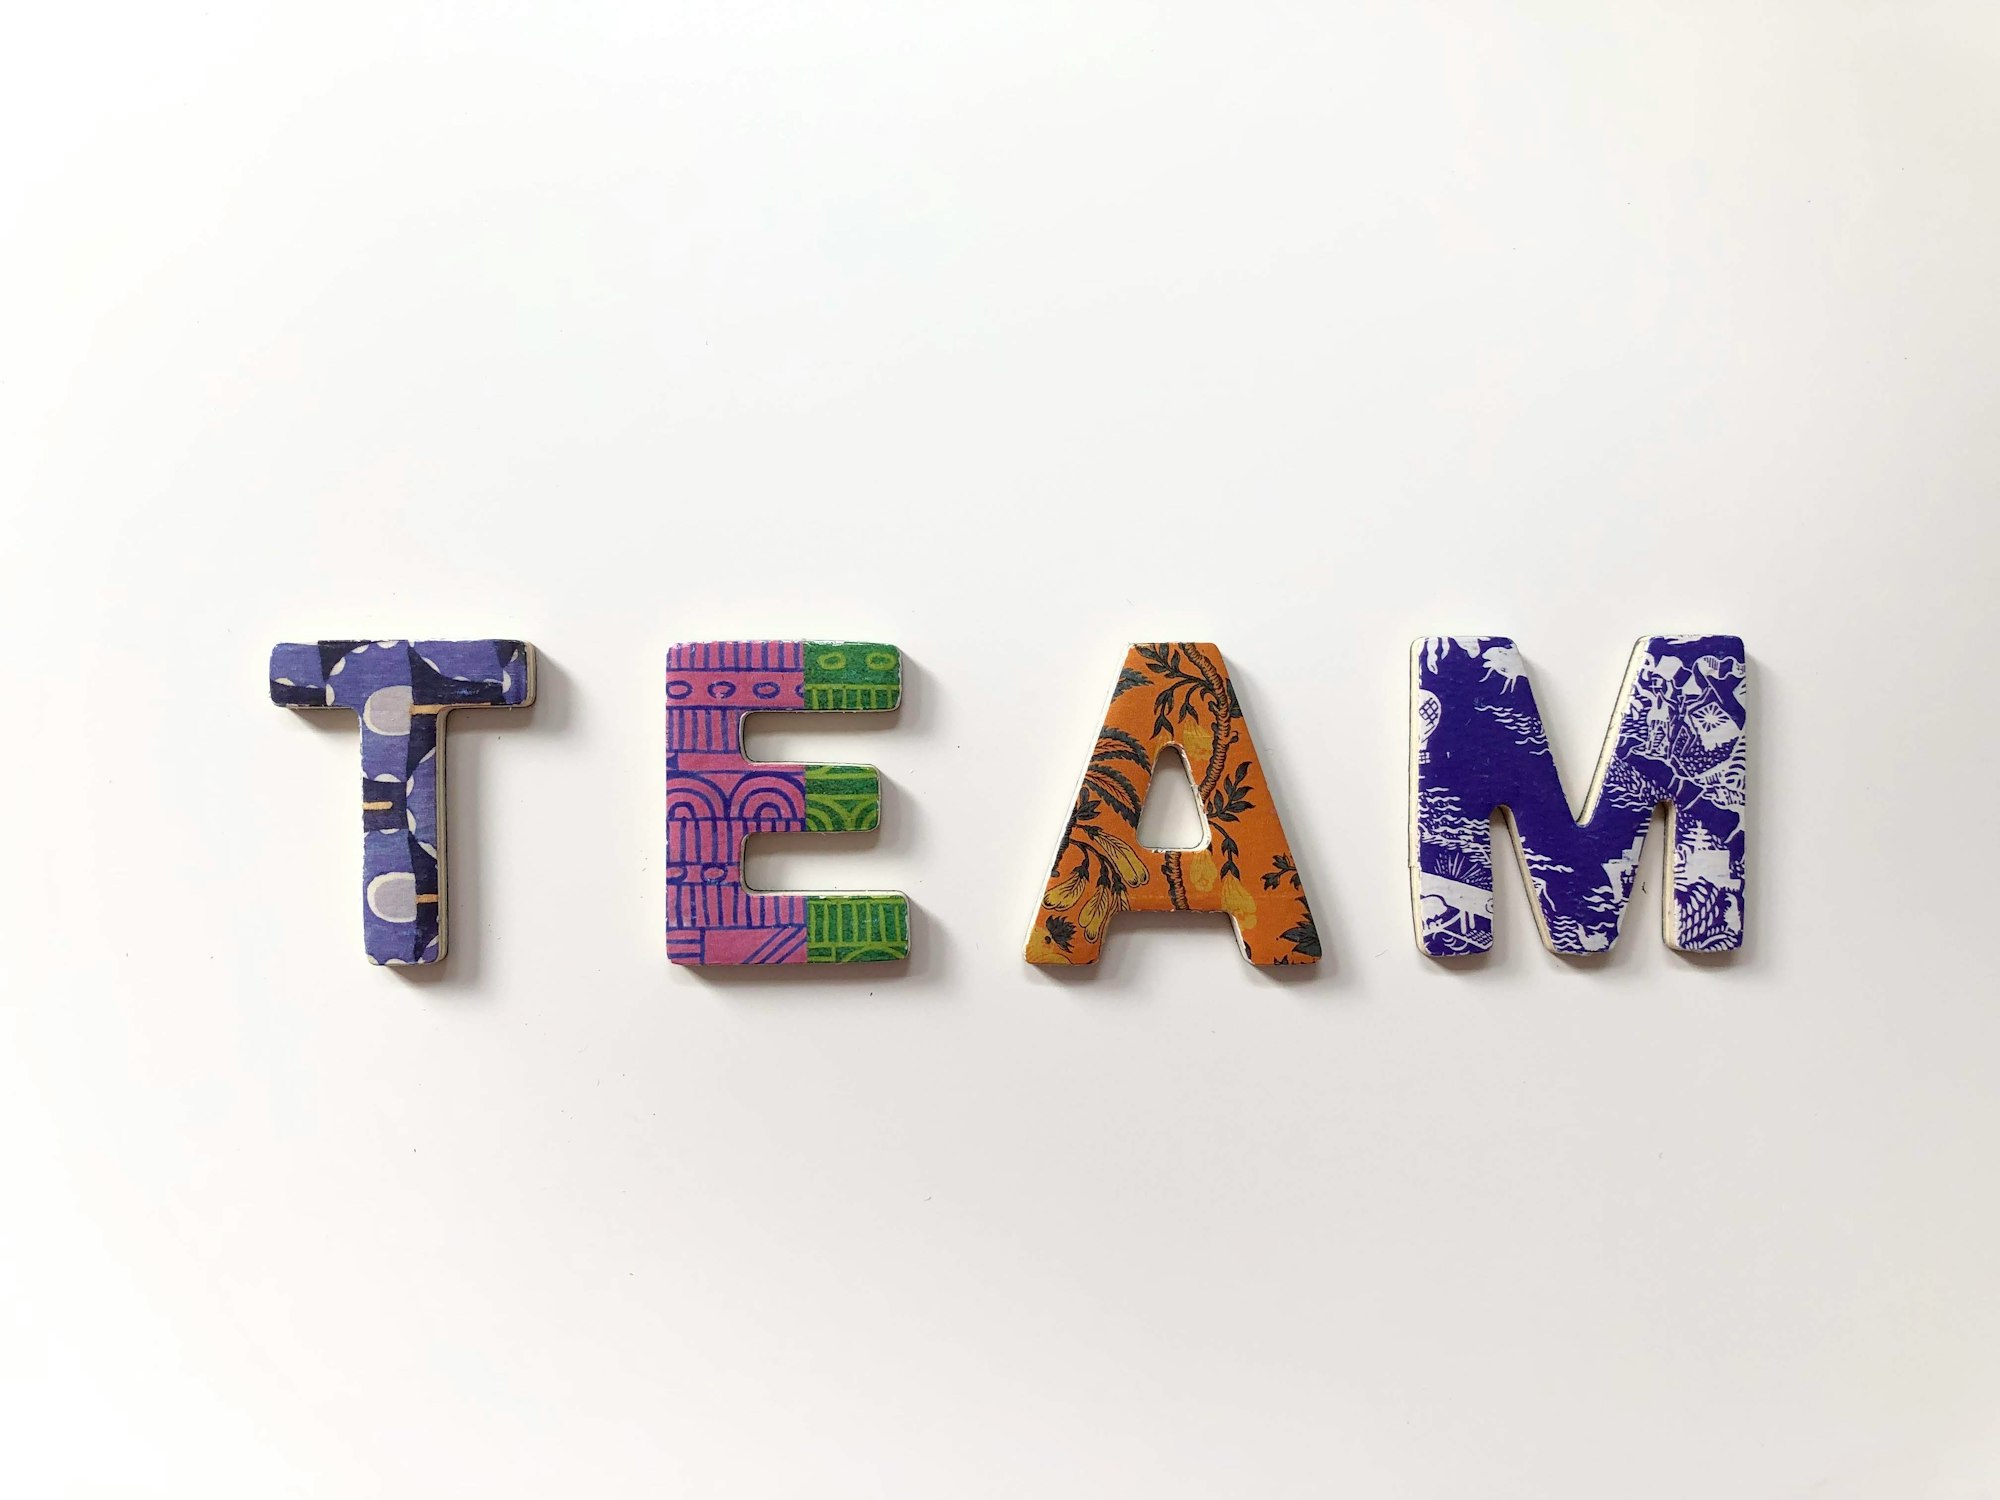 Team in Colorful Alphabets